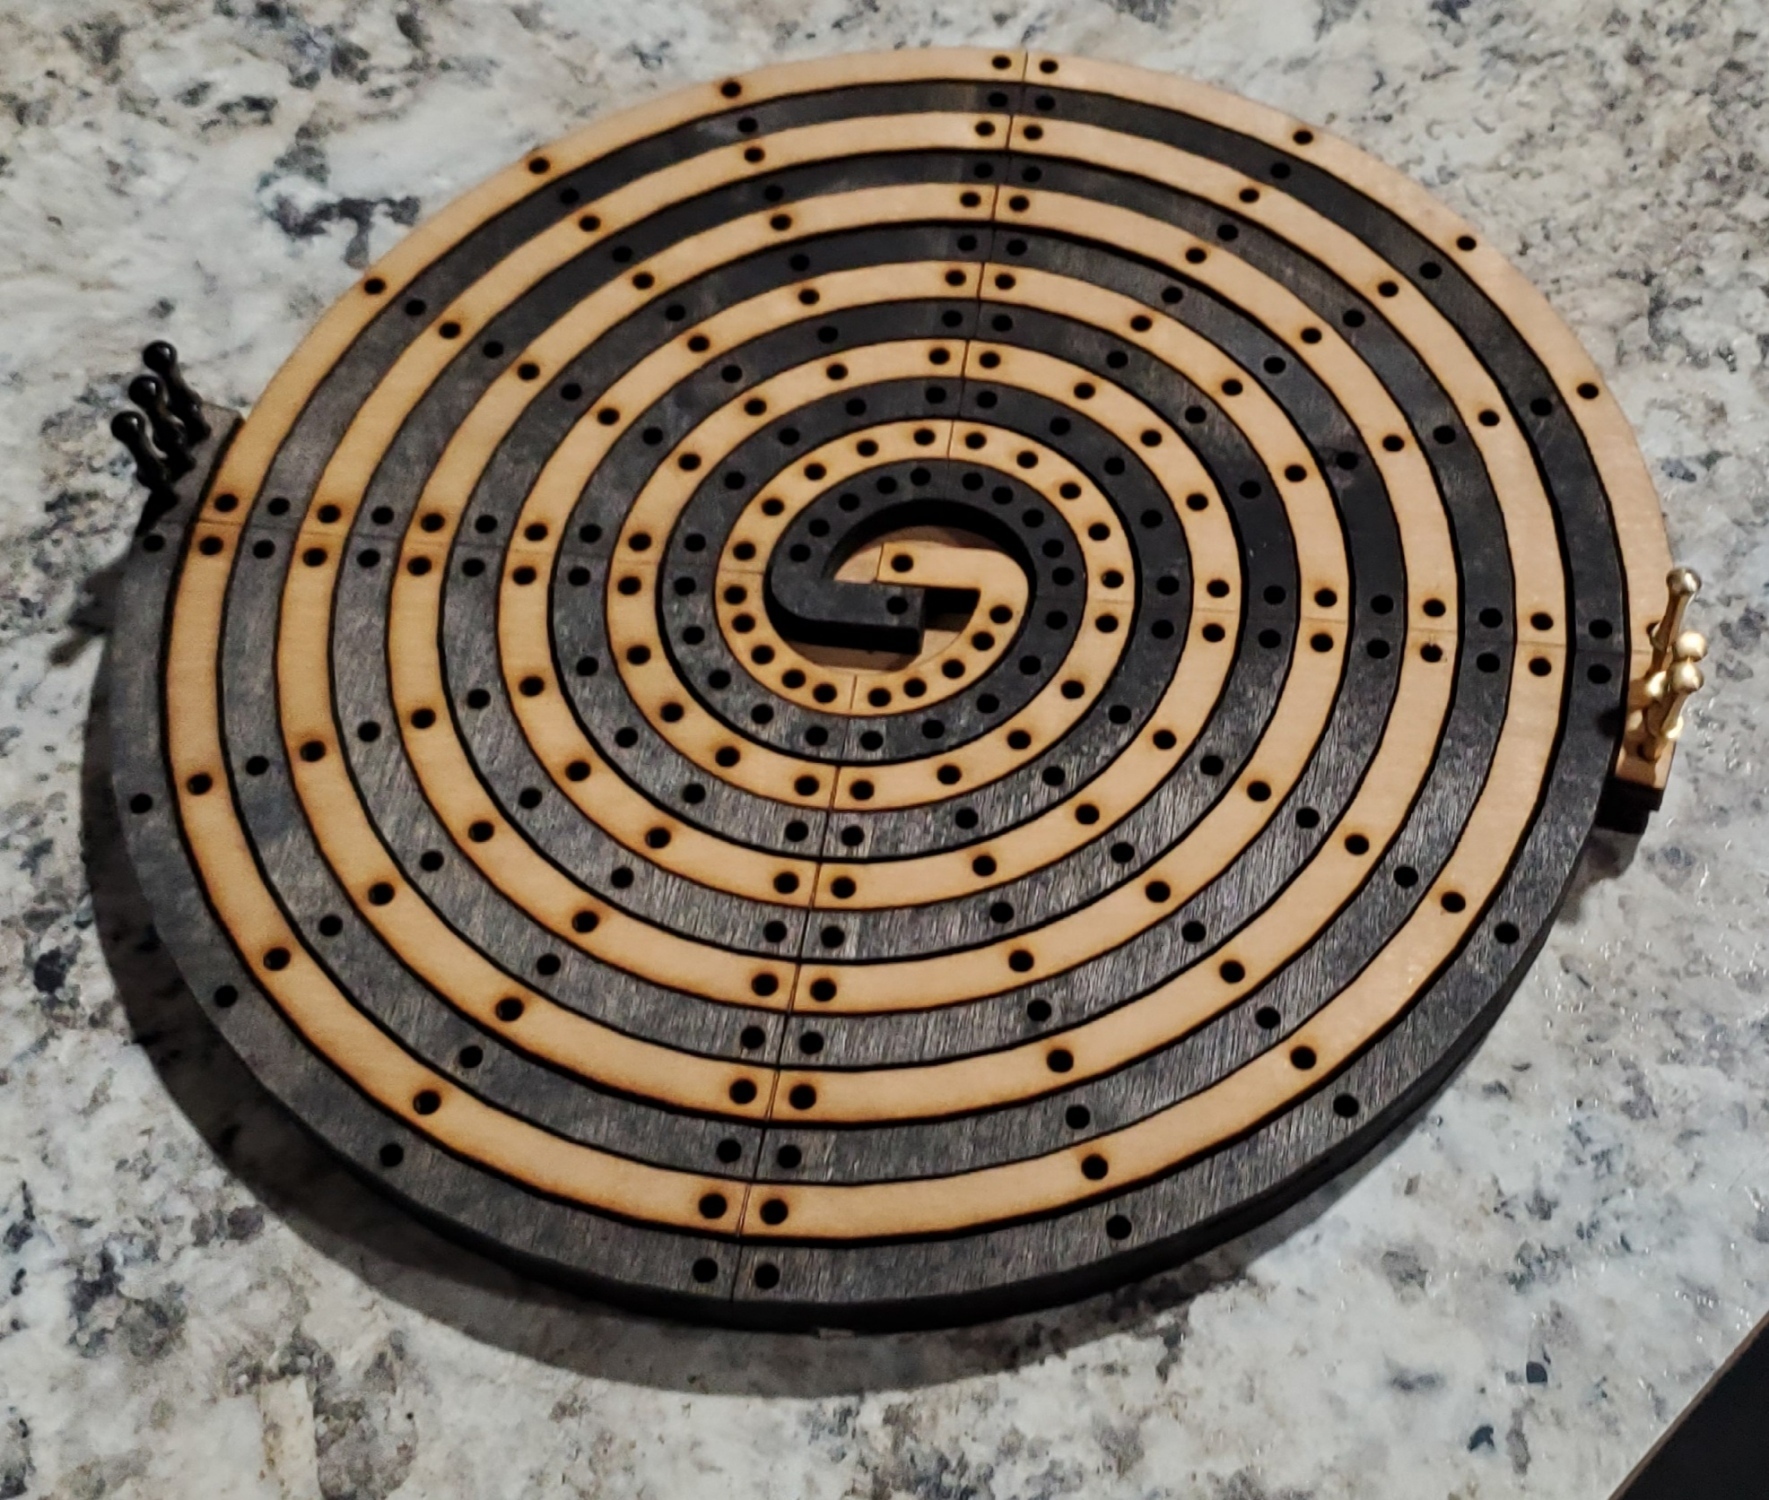 Twisted Spiral Cribbage Board - 2 Players - Large